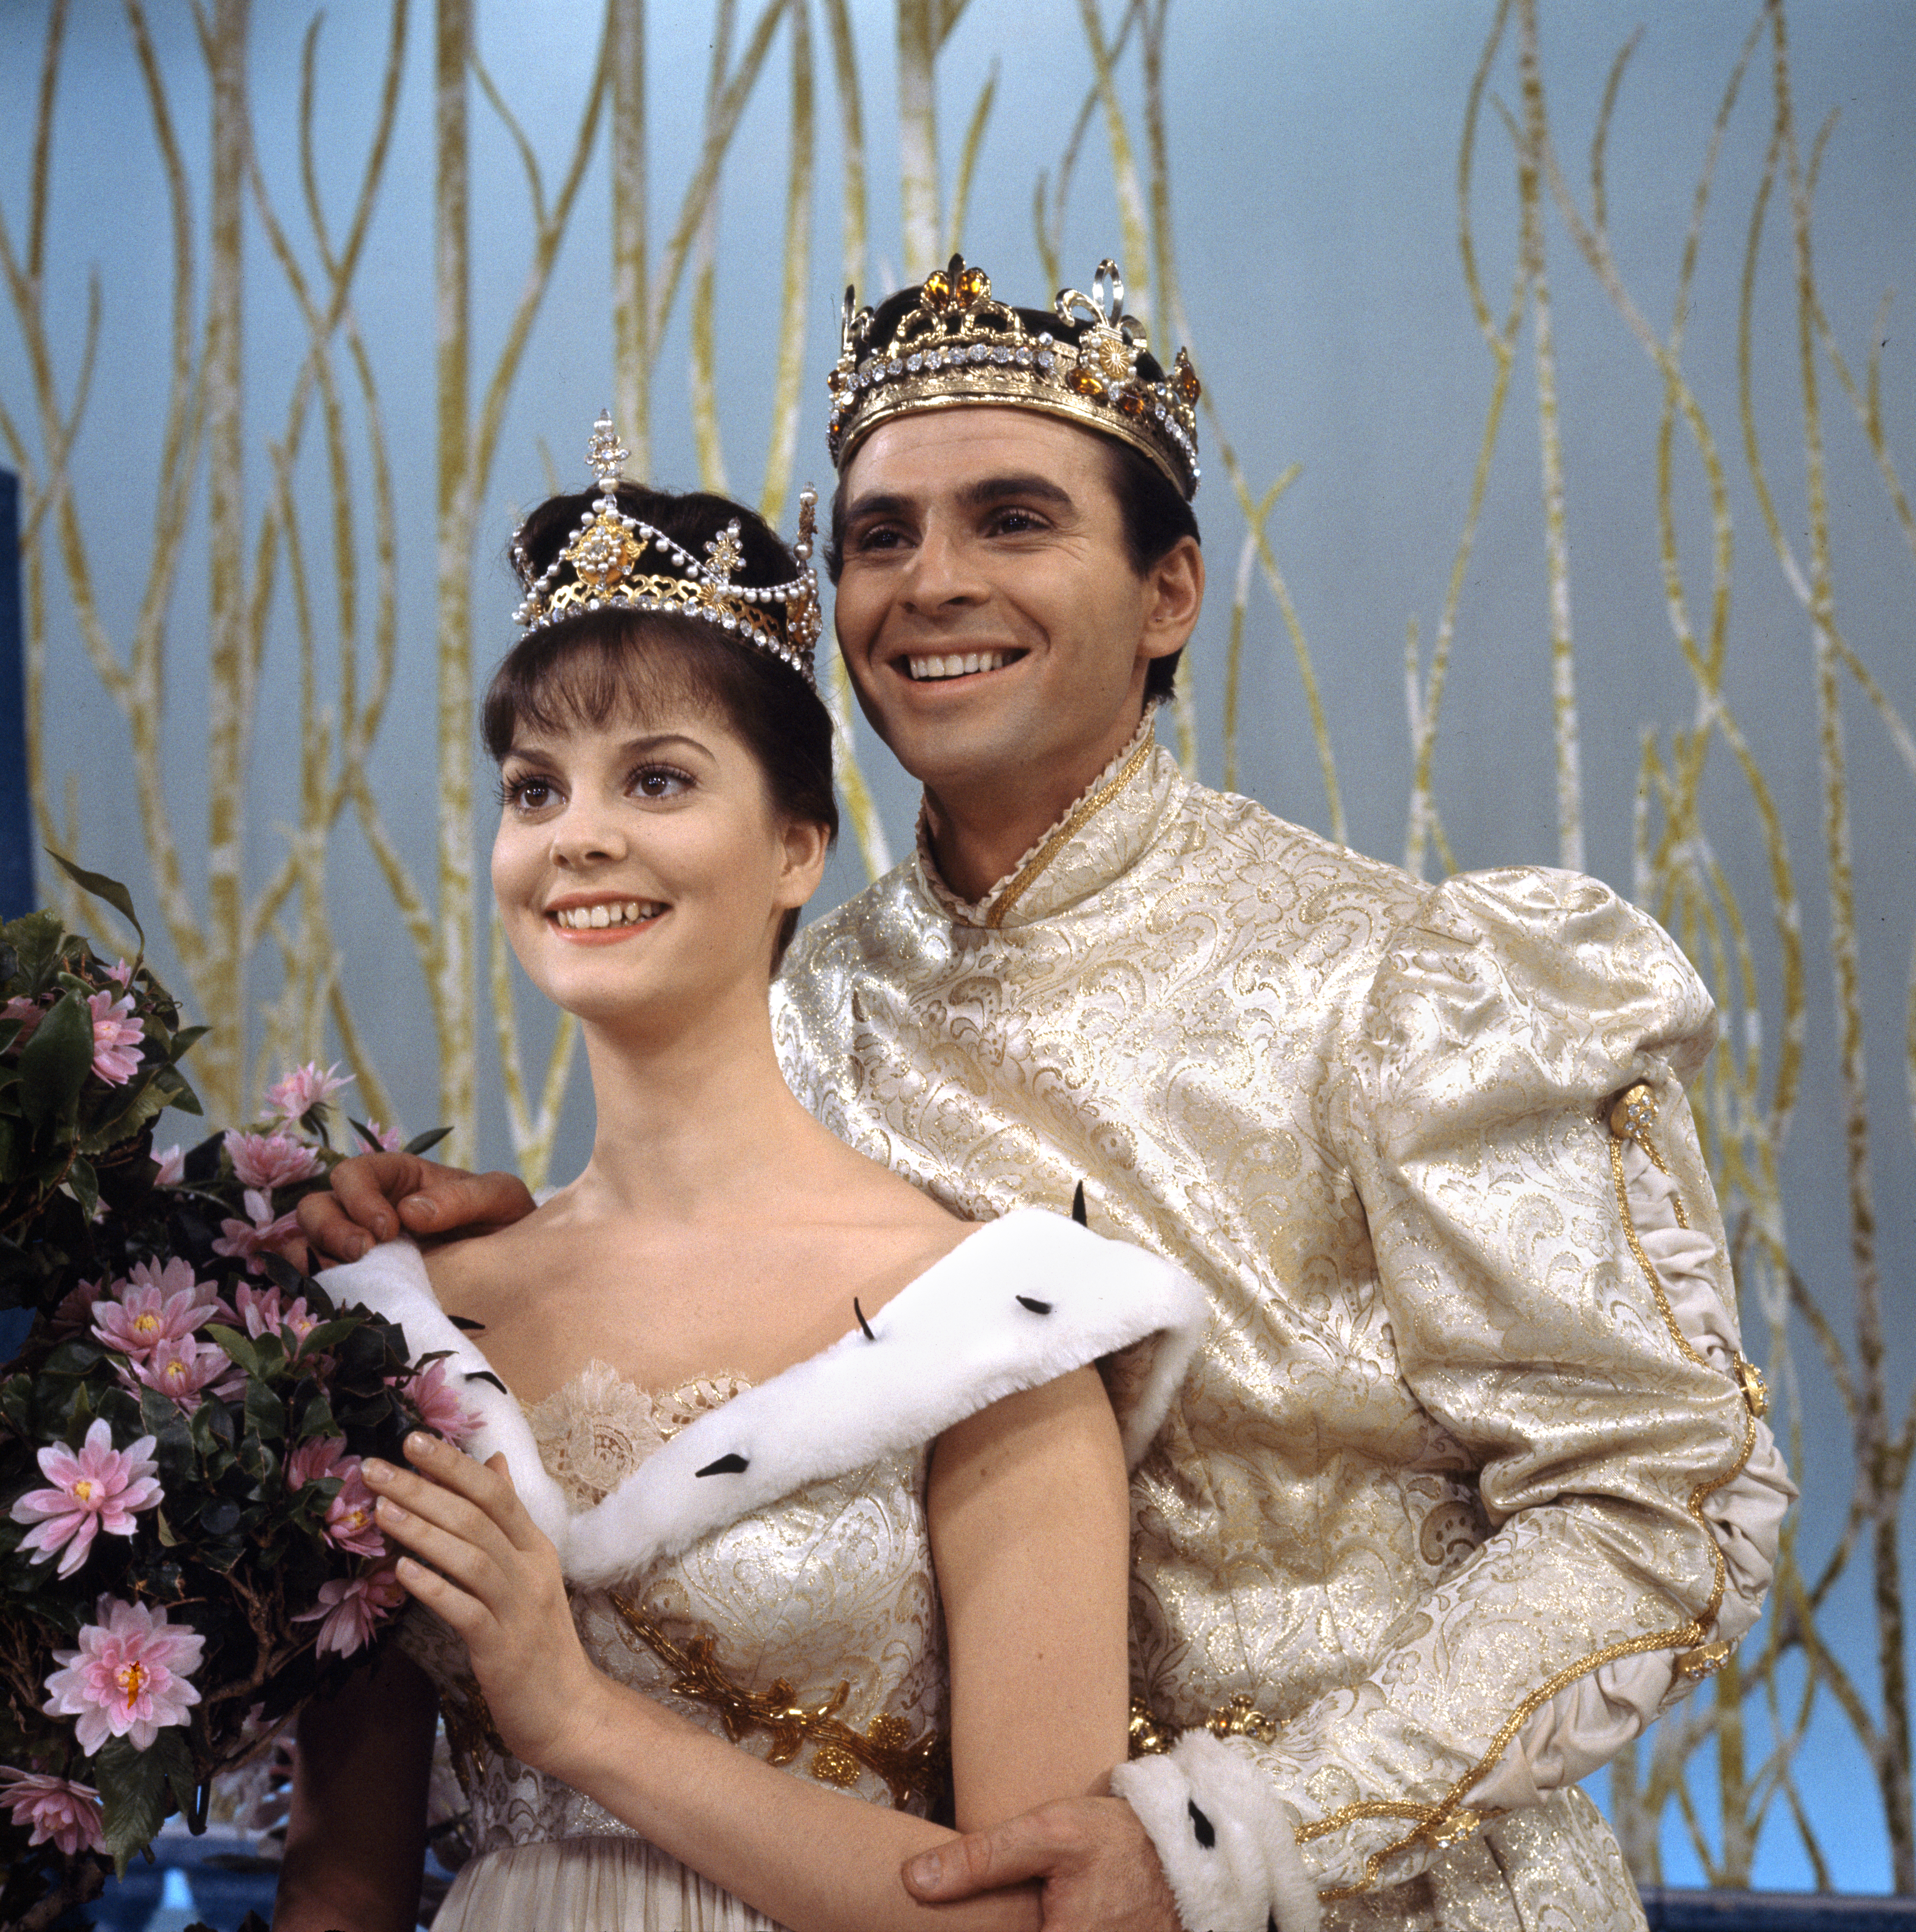 Lesley Ann Warren and Stuart Damon as Cinderella and Prince Charming in "Cinderella", 1965 | Source: Getty Images